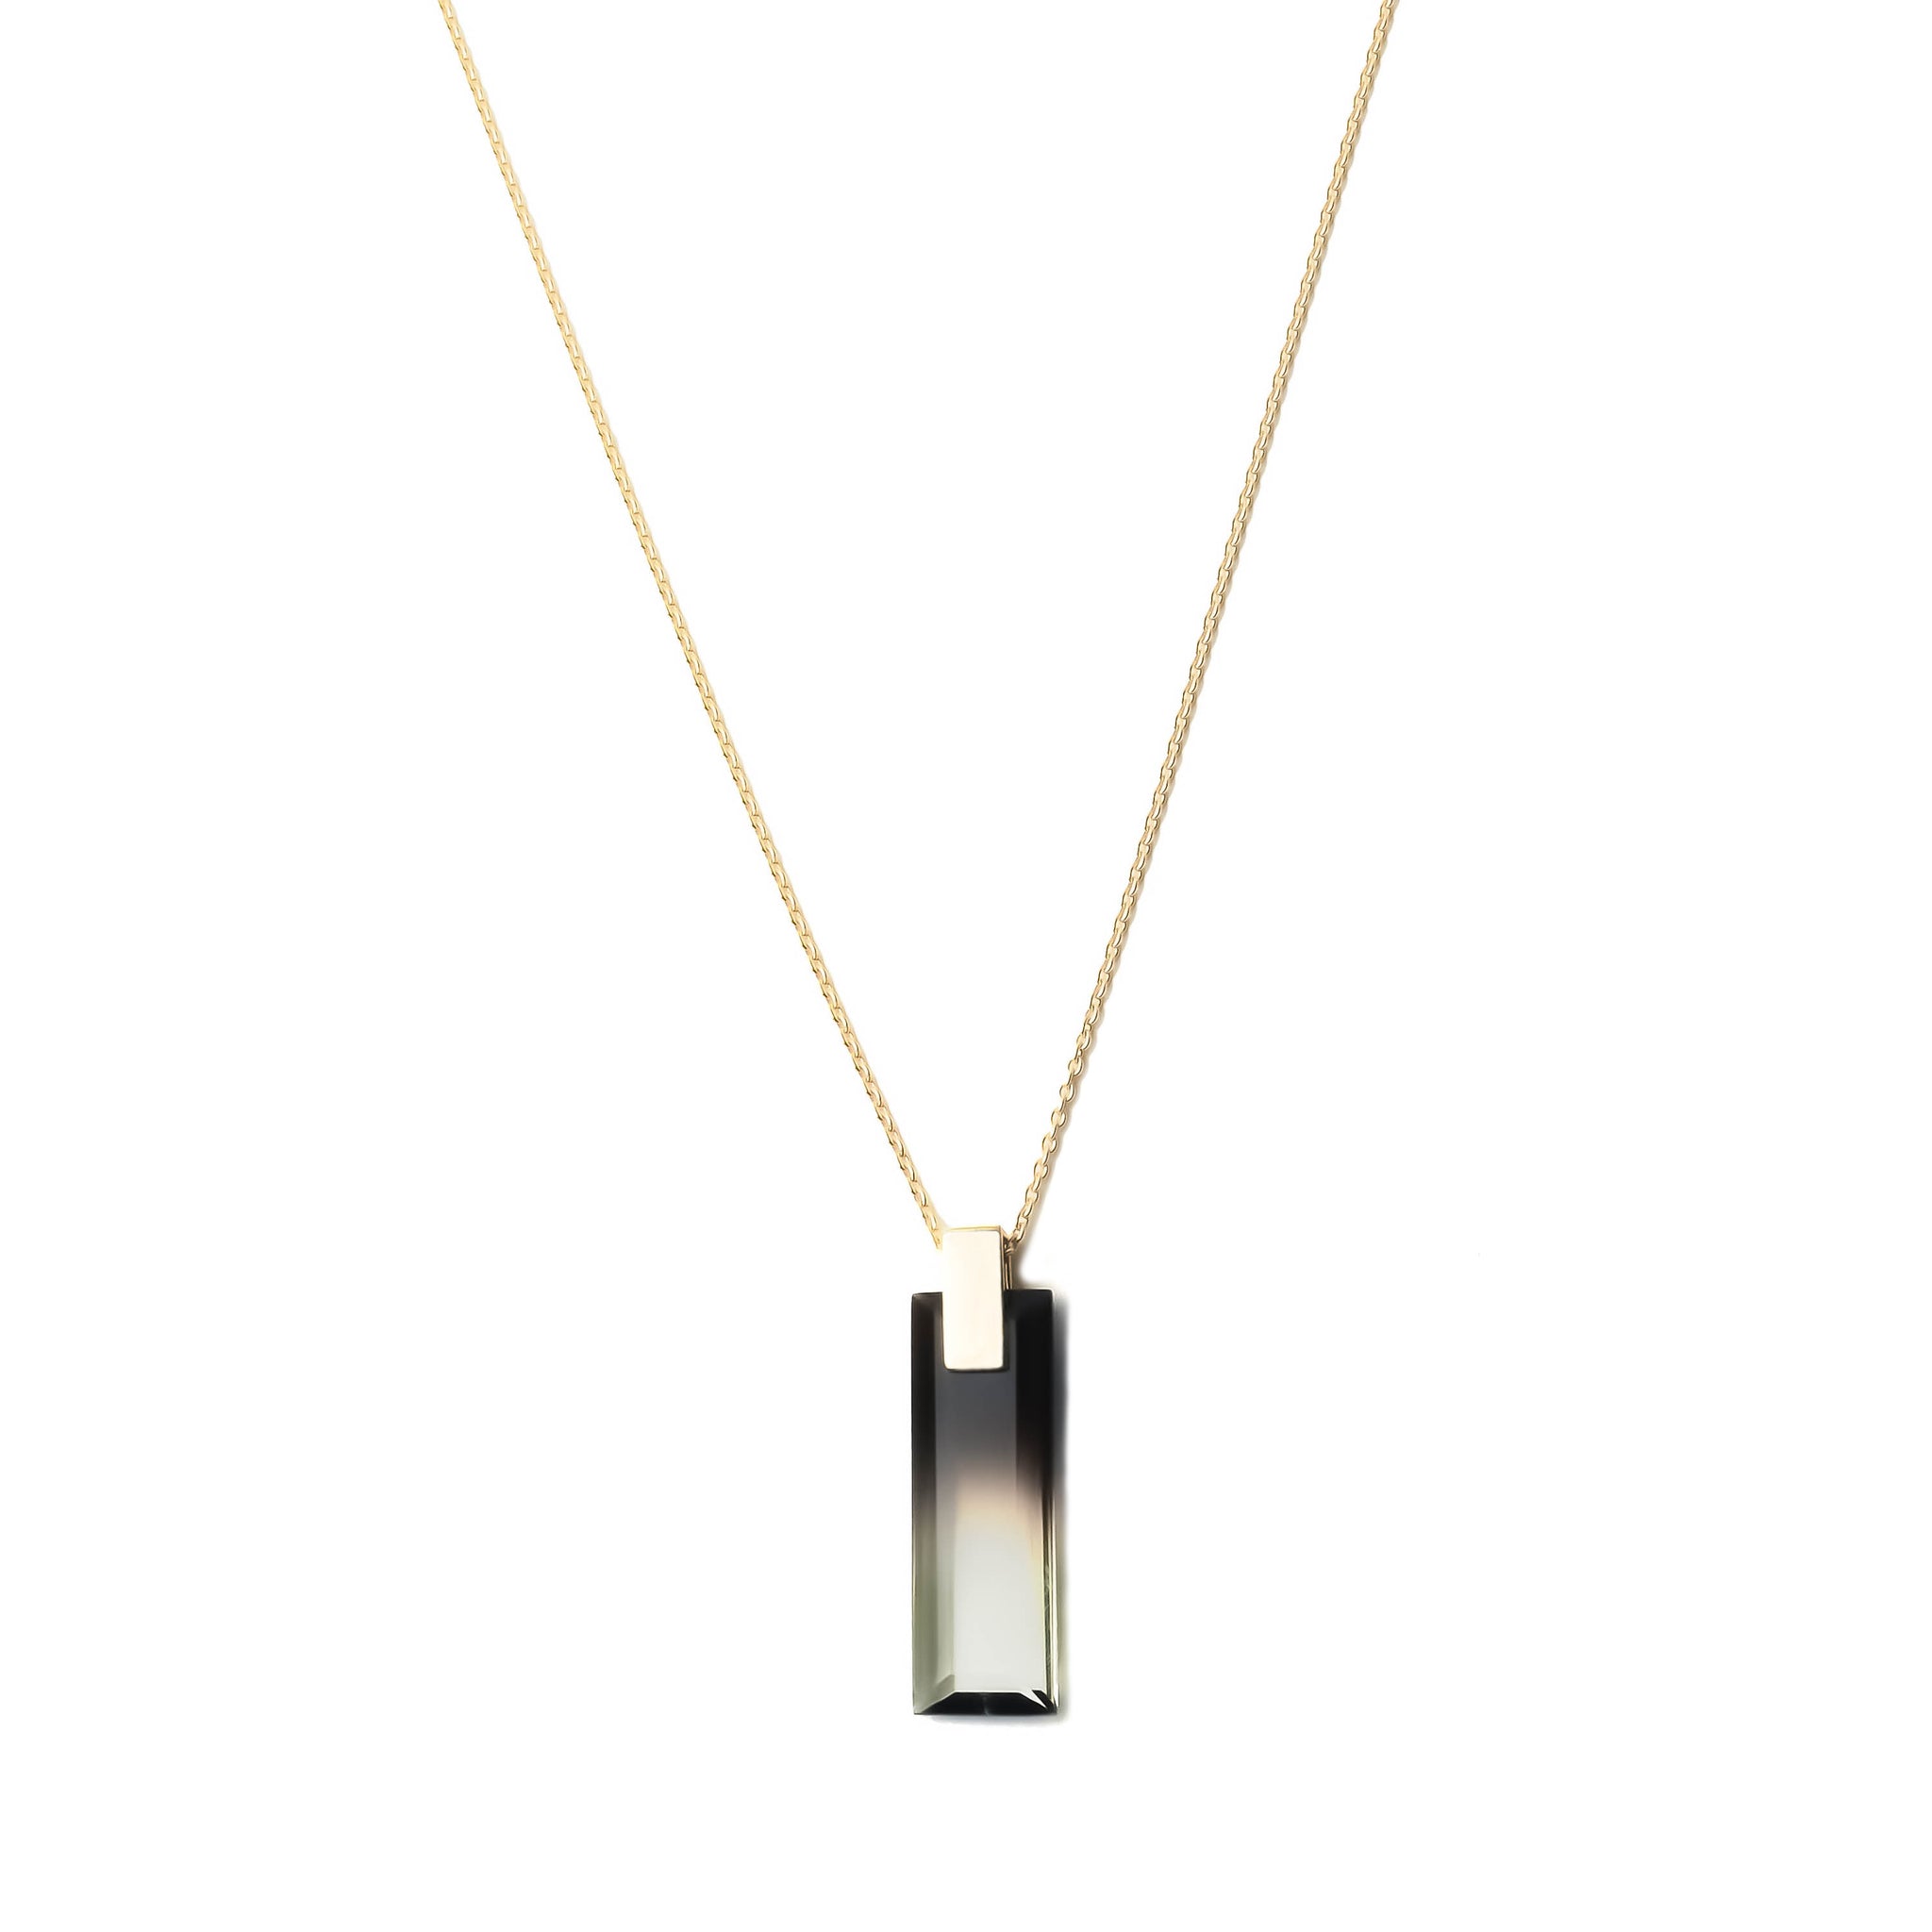 Gold necklace with blackish gray ombre pendant 